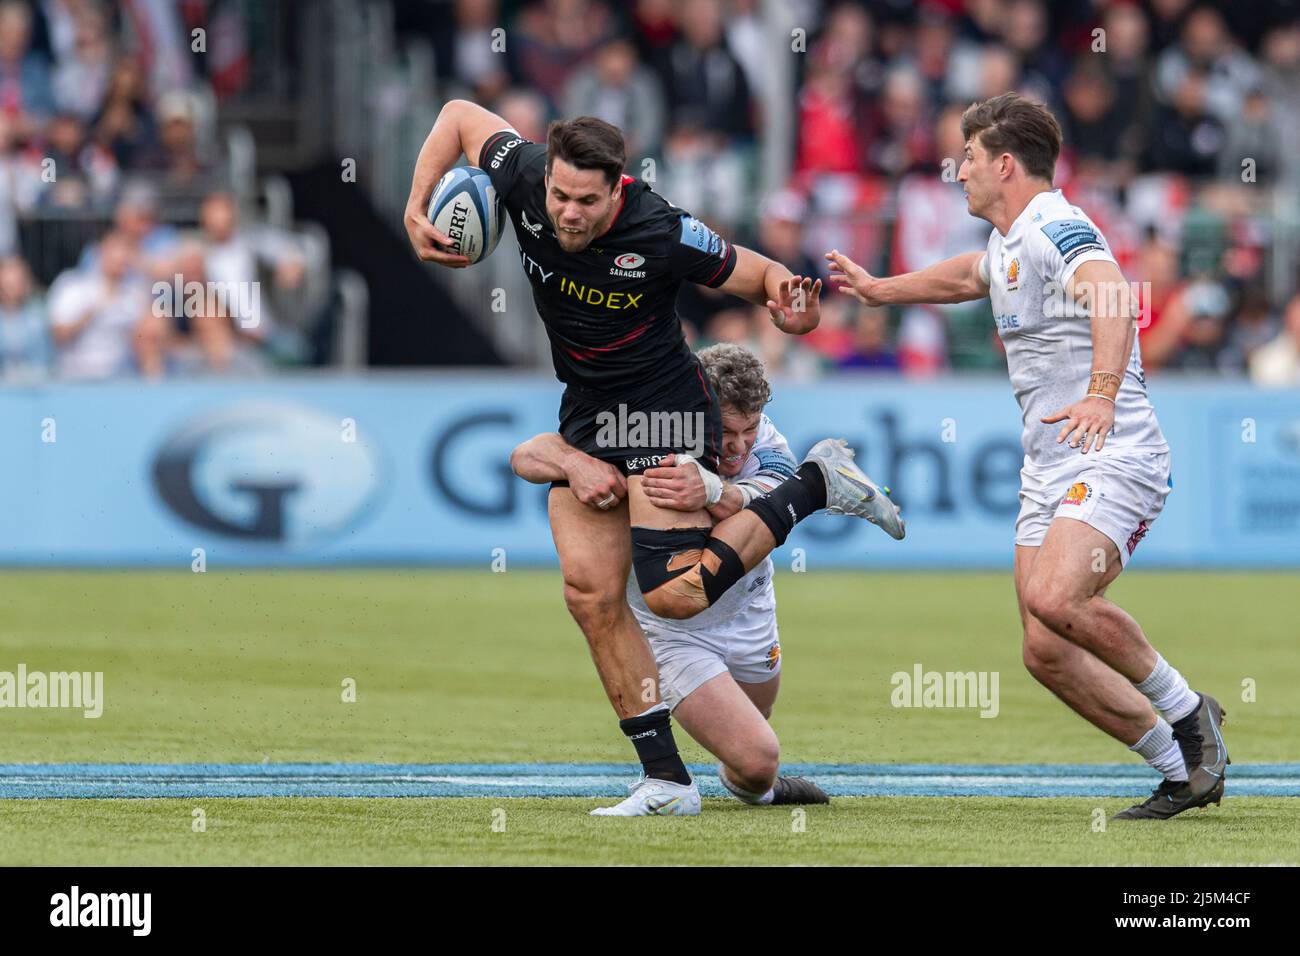 LONDON, UNITED KINGDOM. 24th, Apr 2022. Sean Maitland of Saracens is tackled during Gallagher Premiership Rugby Match between Saracens vs Exeter Chiefs at StoneX Stadium on Sunday, 24 April 2022. LONDON ENGLAND.  Credit: Taka G Wu/Alamy Live News Stock Photo